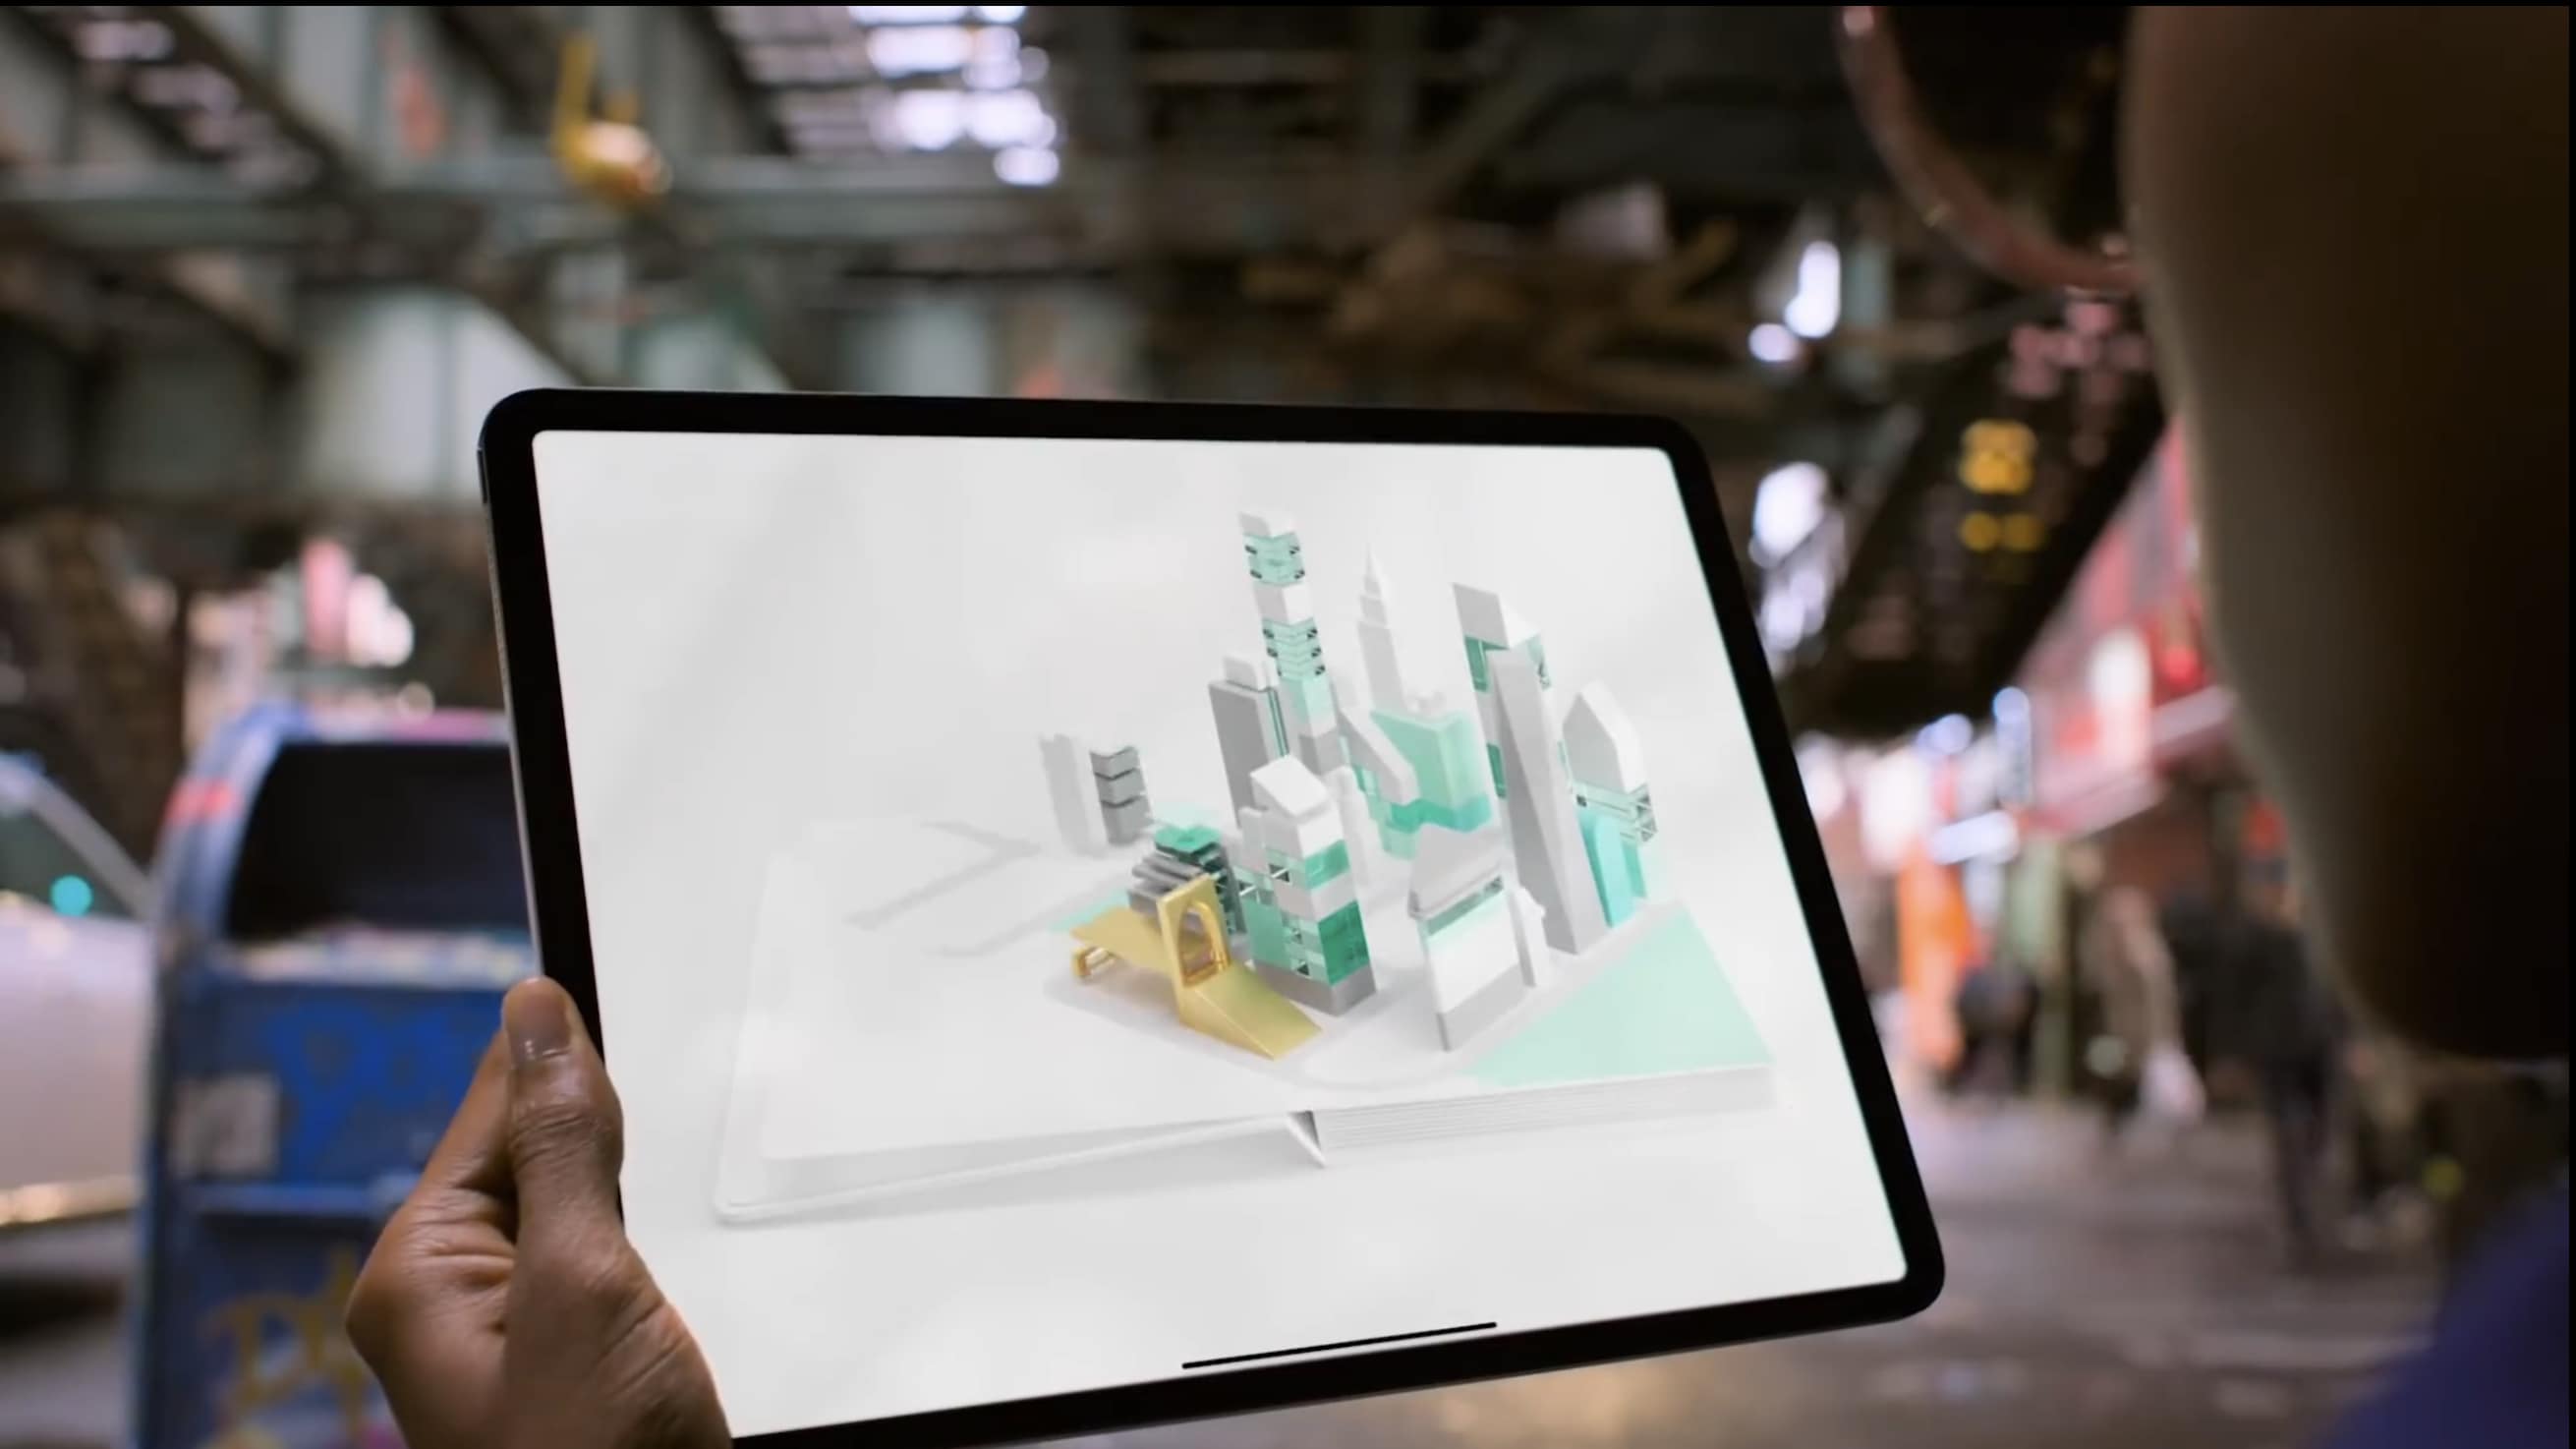 Raw power comes up in Apple’s new video called 5 Reasons iPad Pro can be your next computer.